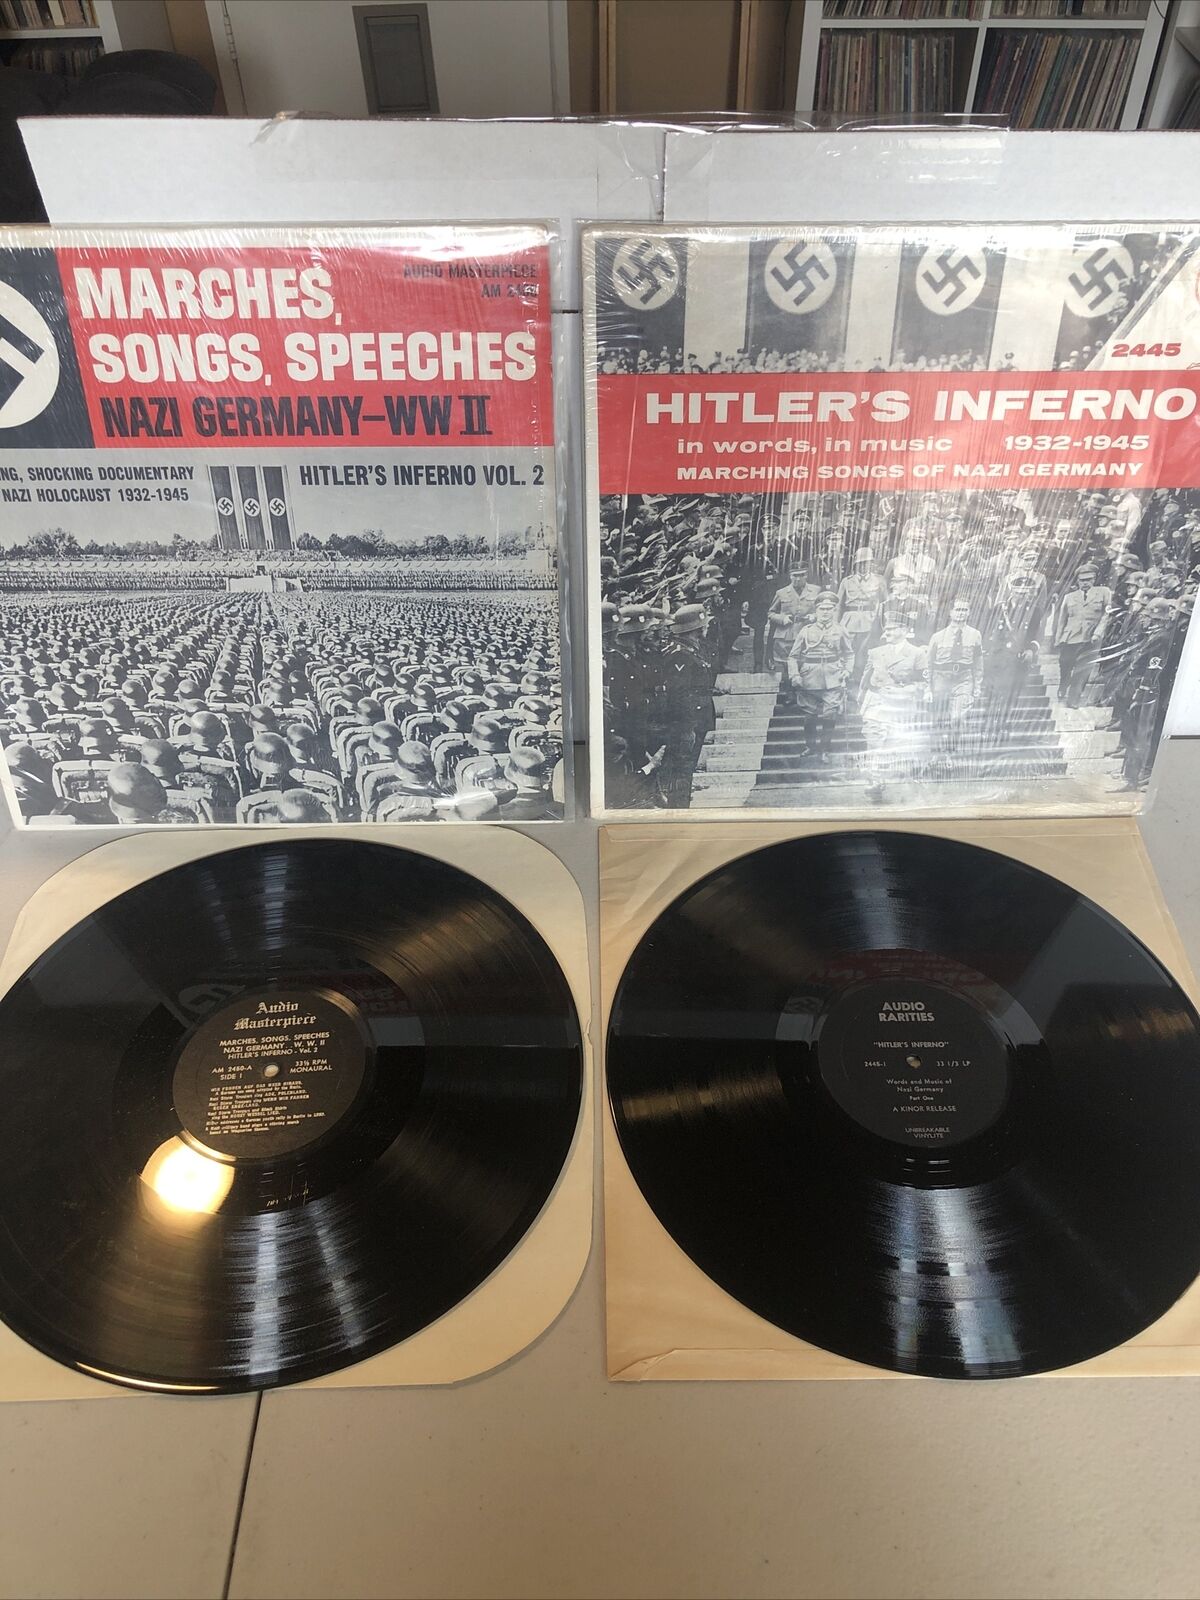 HITLER’S INFERNO 1932-1945 LOT OF (2) LPs MARCHES SONGS SPEECHES NAZI GERMANY